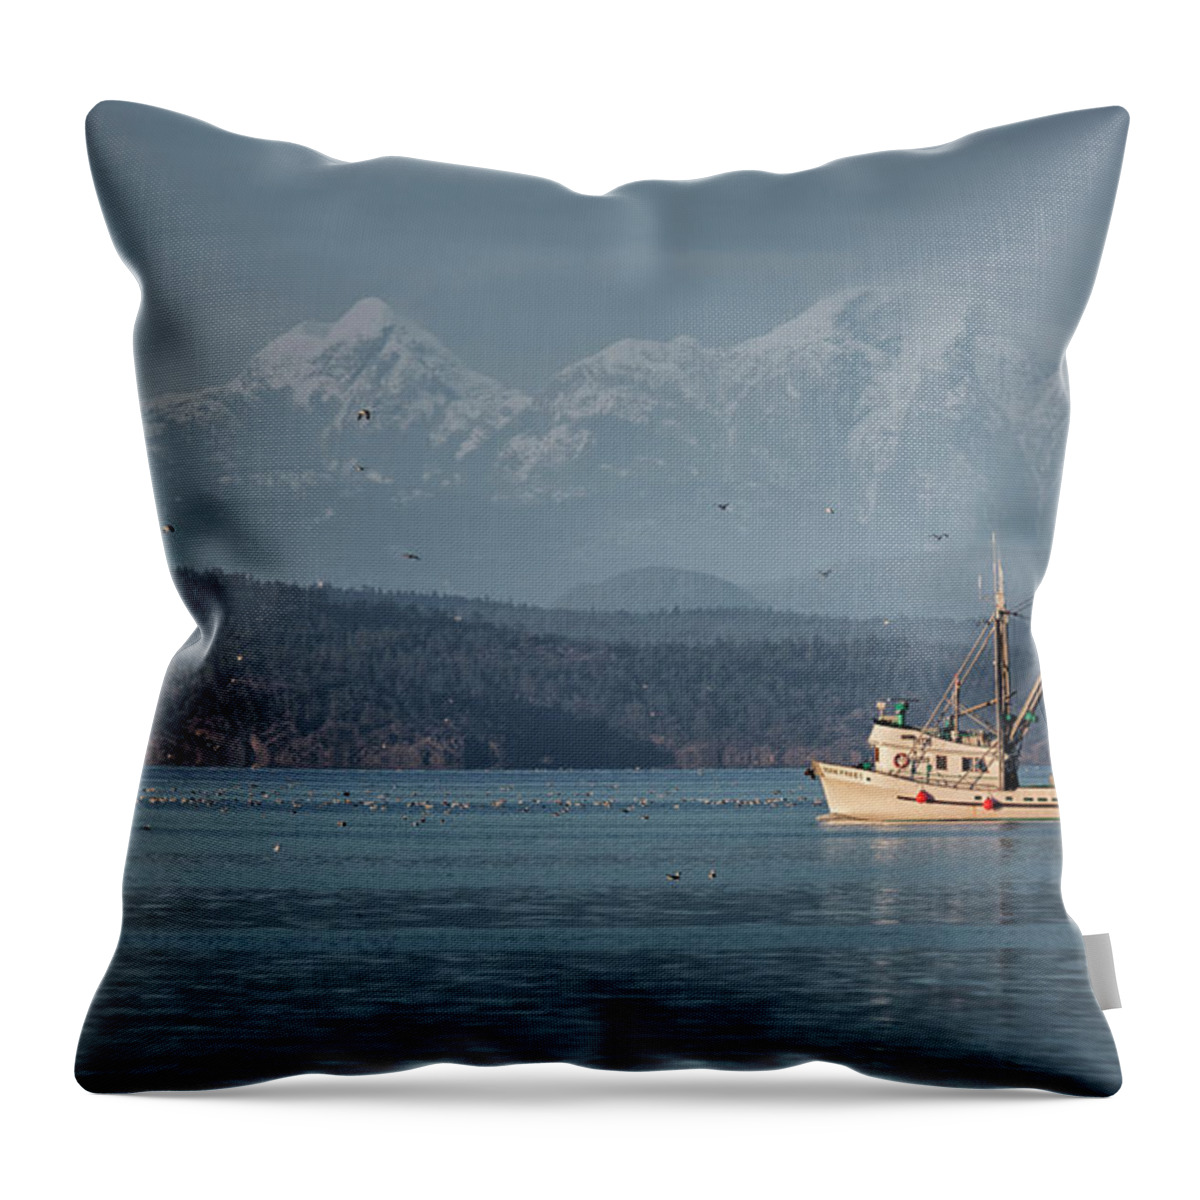 Fishing Boat Throw Pillow featuring the photograph Born Free by Randy Hall